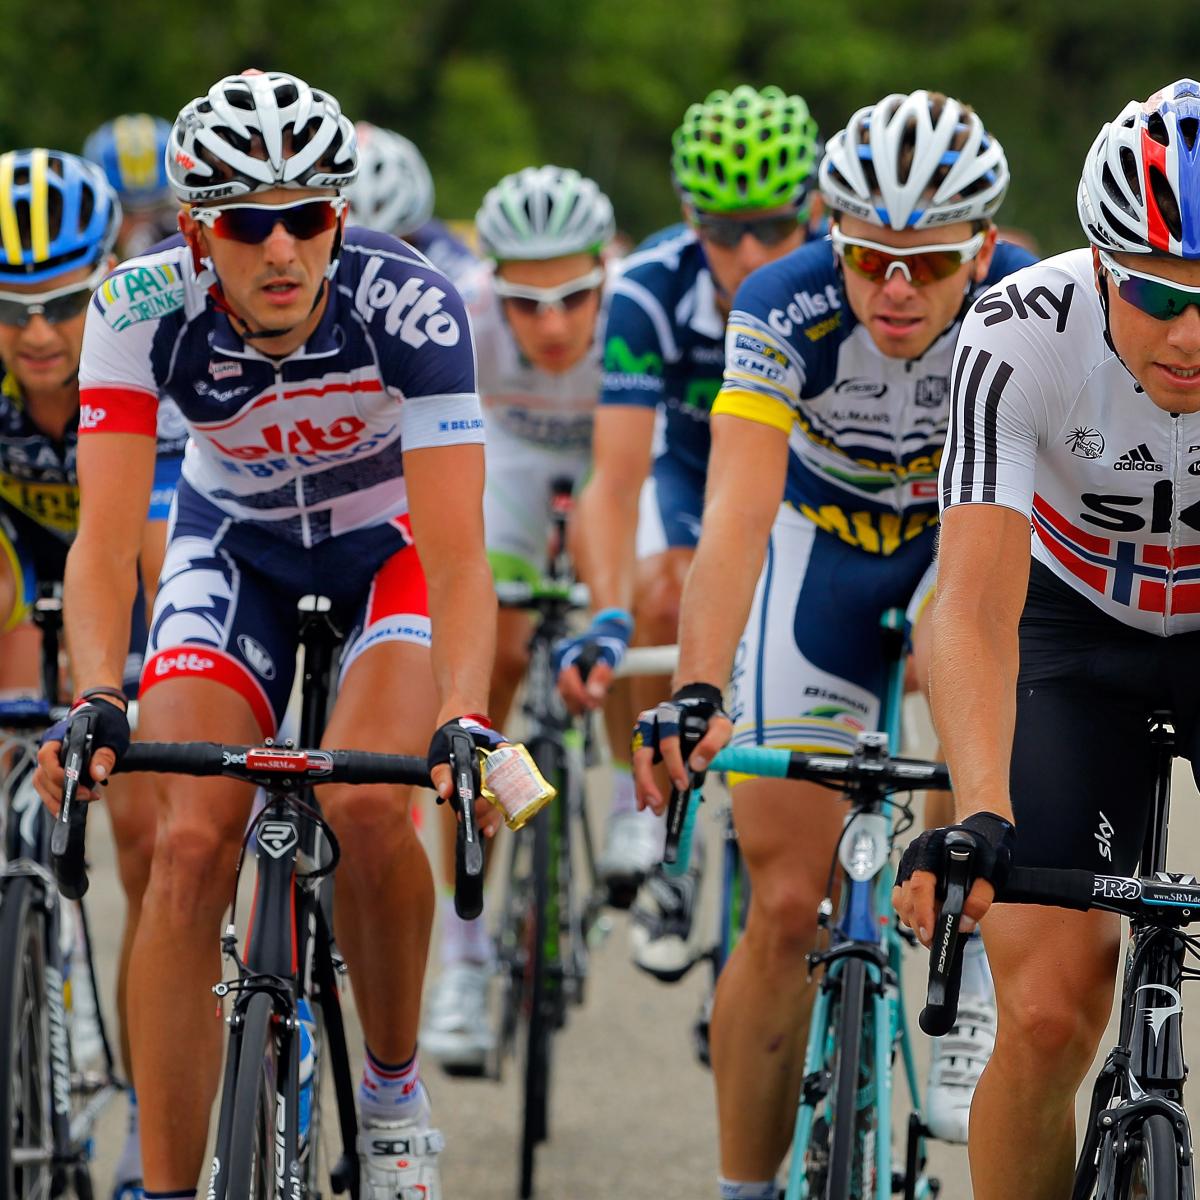 Tour De France 2012 Live: Sky Procycling Continues Dominance Down the ...